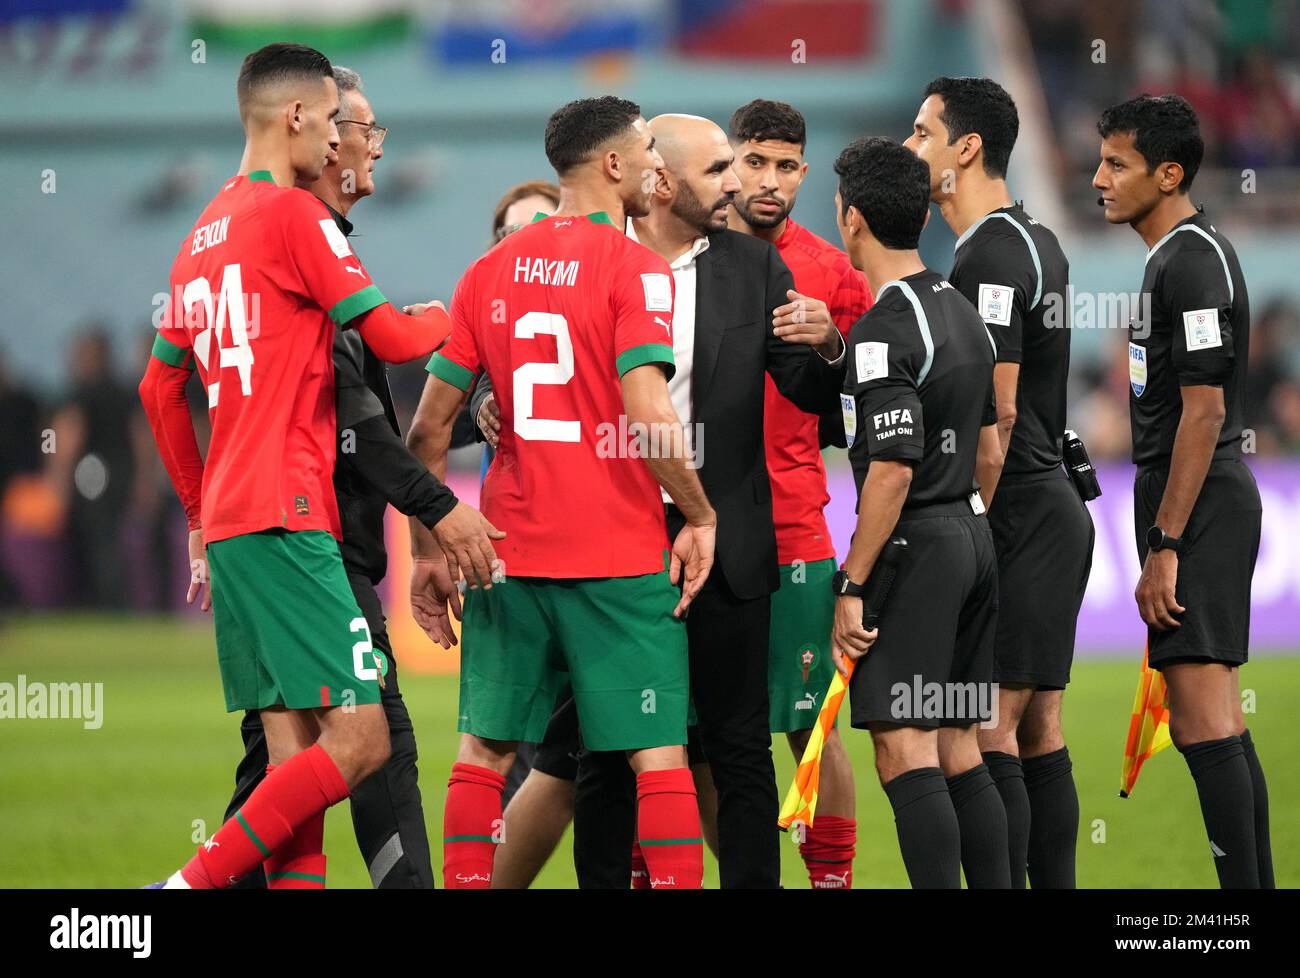 DOHA, QATAR - DECEMBER 17: Walid Regragui head coach of Morocco and Players of Morocco Badr Benoun,Achraf Hakimi argues with the Referee Abdulrahman Al-Jassim ,during the FIFA World Cup Qatar 2022 3rd Place match between Croatia and Morocco at Khalifa International Stadium on December 17, 2022 in Doha, Qatar. (Photo by MB Media) Stock Photo